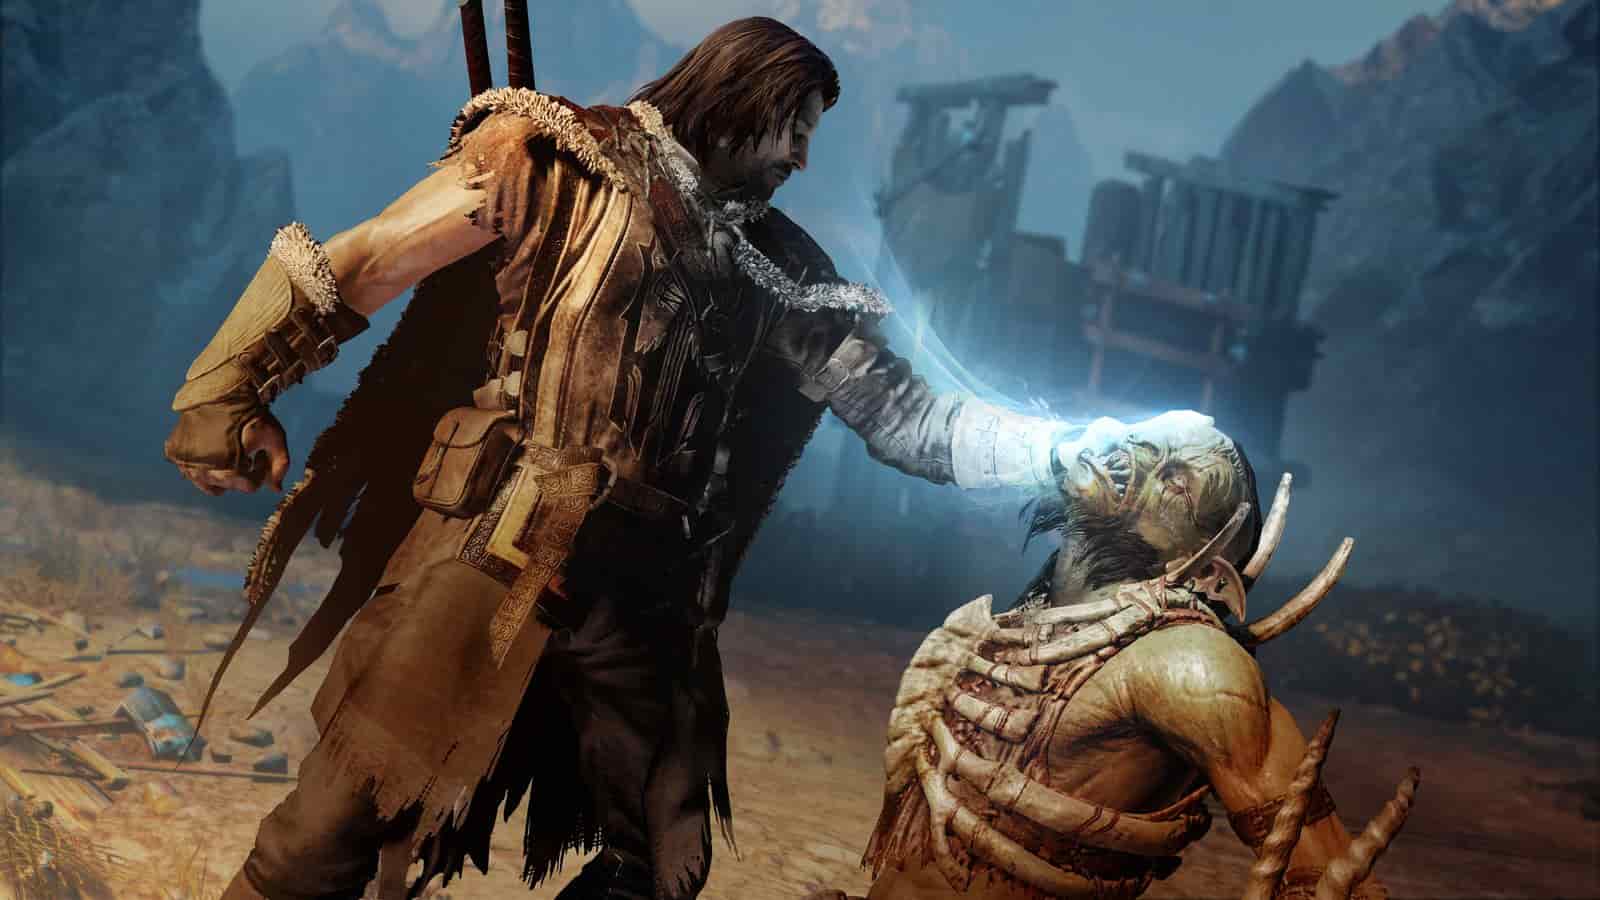 The Scouring of Mordor trophy in Middle-earth: Shadow of Mordor